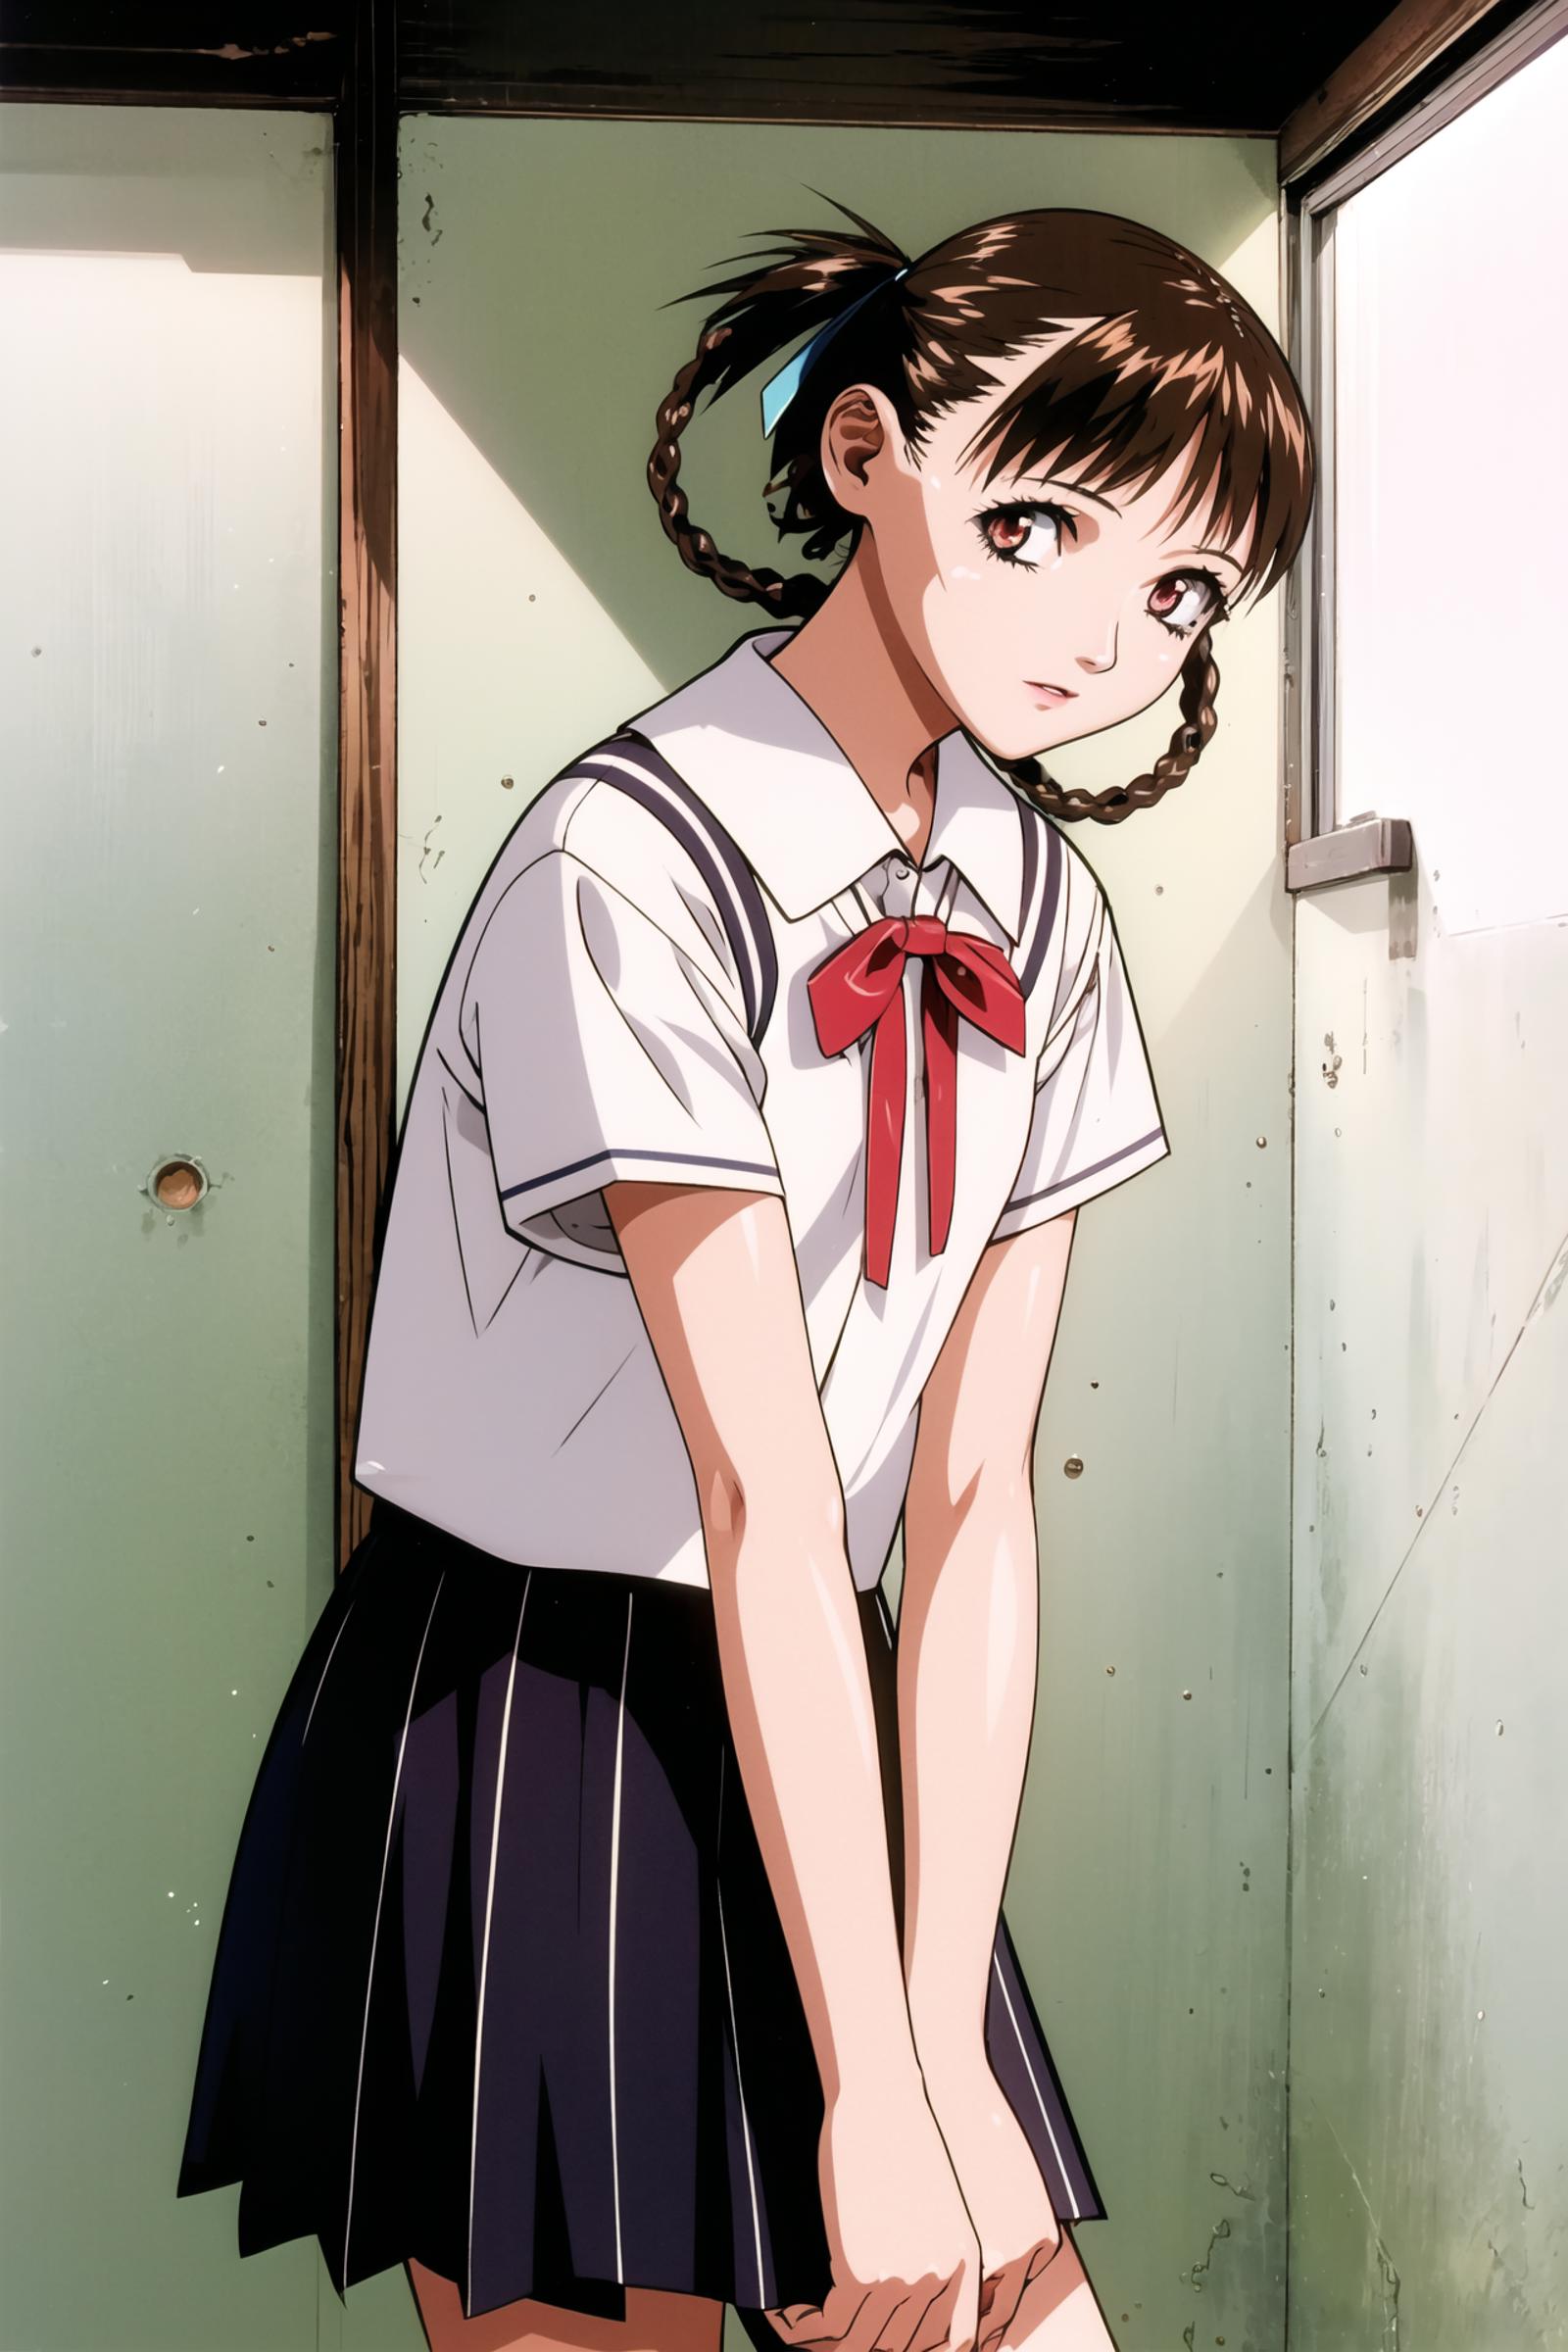 A girl with a blue ribbon in her hair stands by a door.